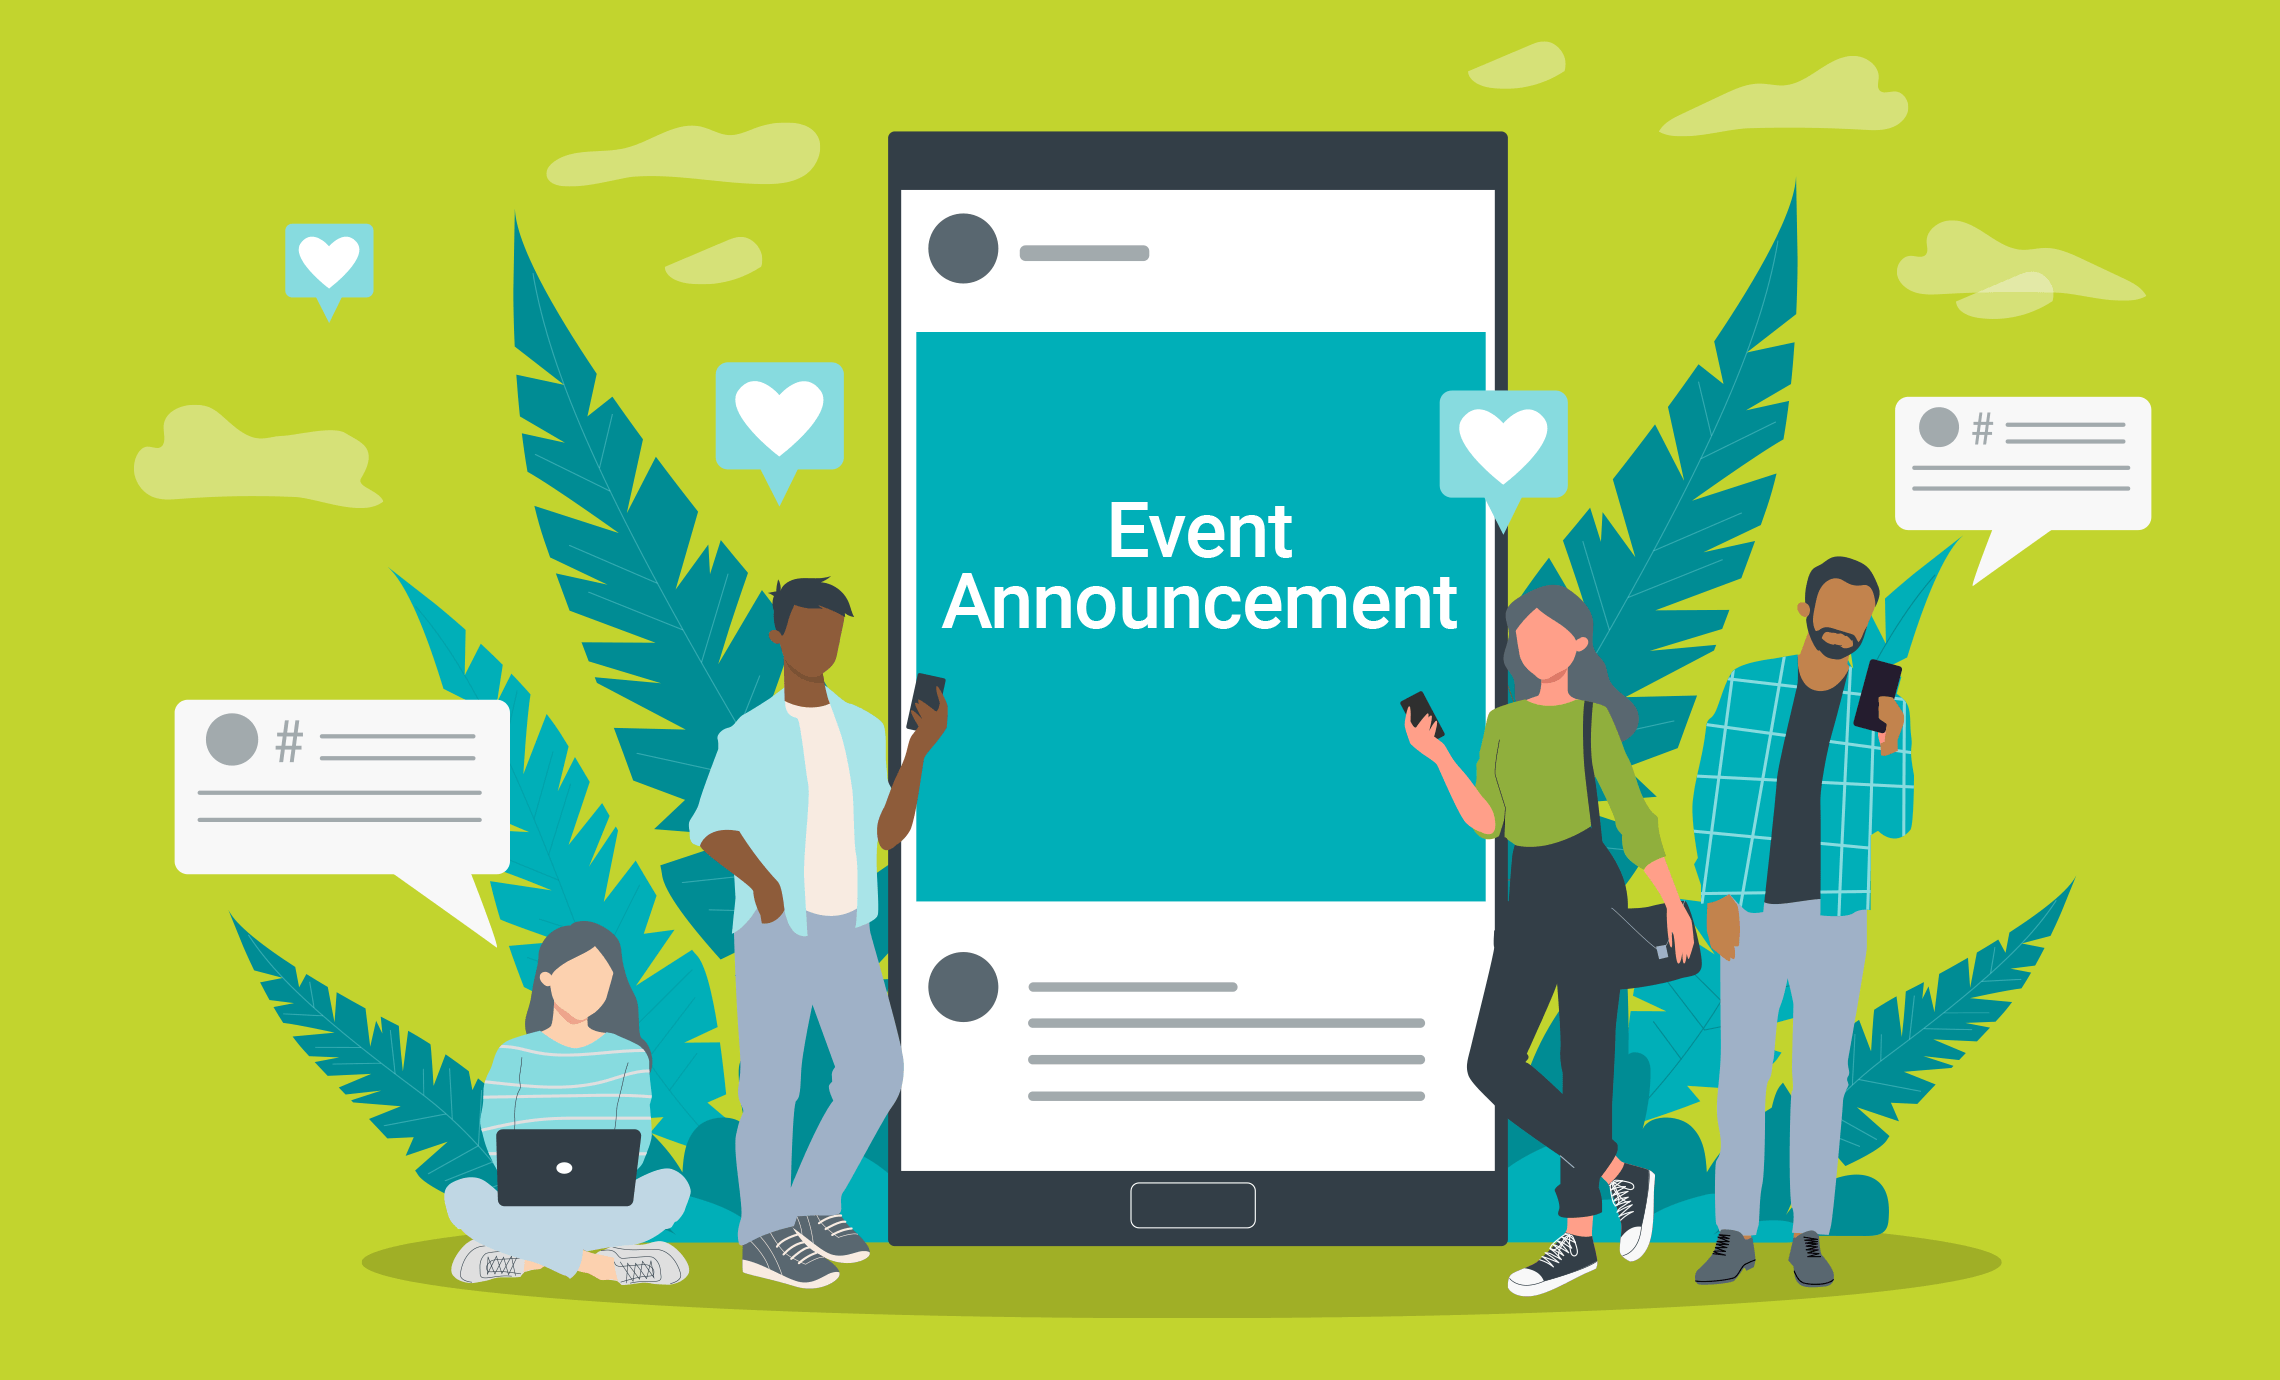 4 effective ways to market your association’s events